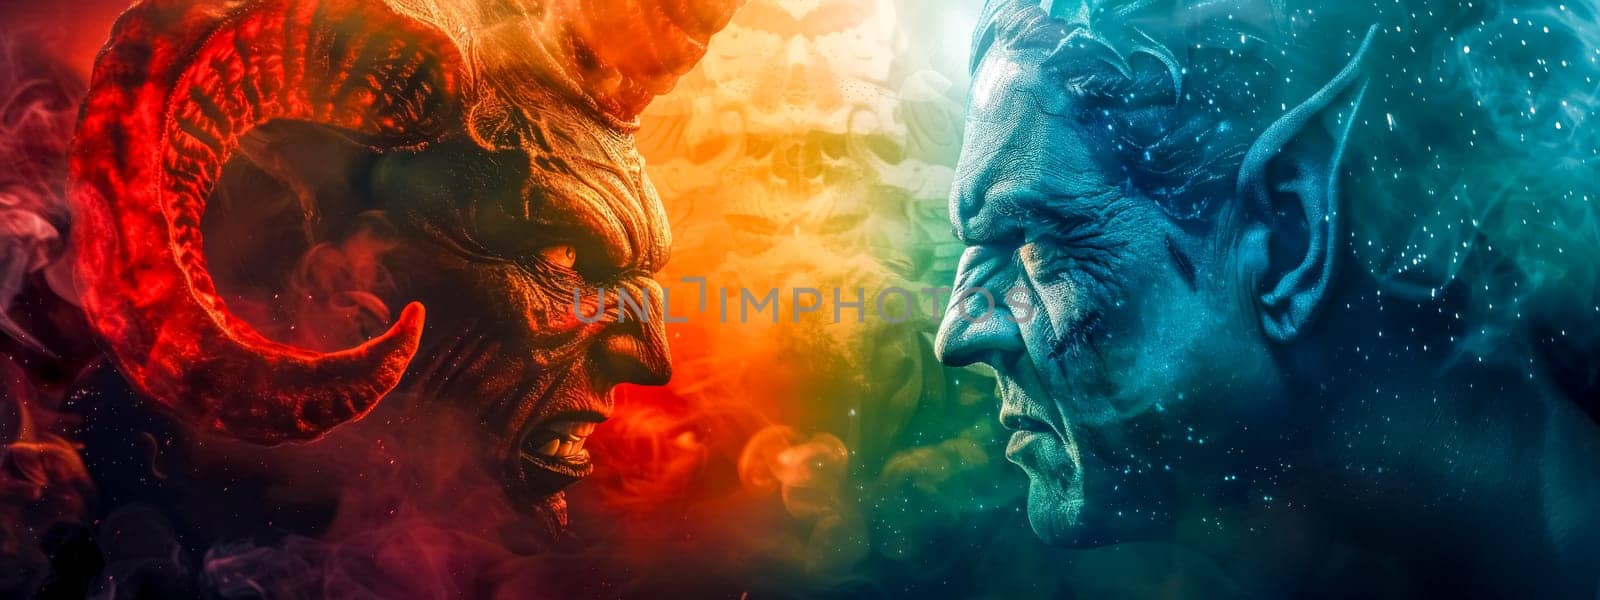 Abstract artistic image of a red devil and a blue demon in a mystical face-off amidst colorful smoke